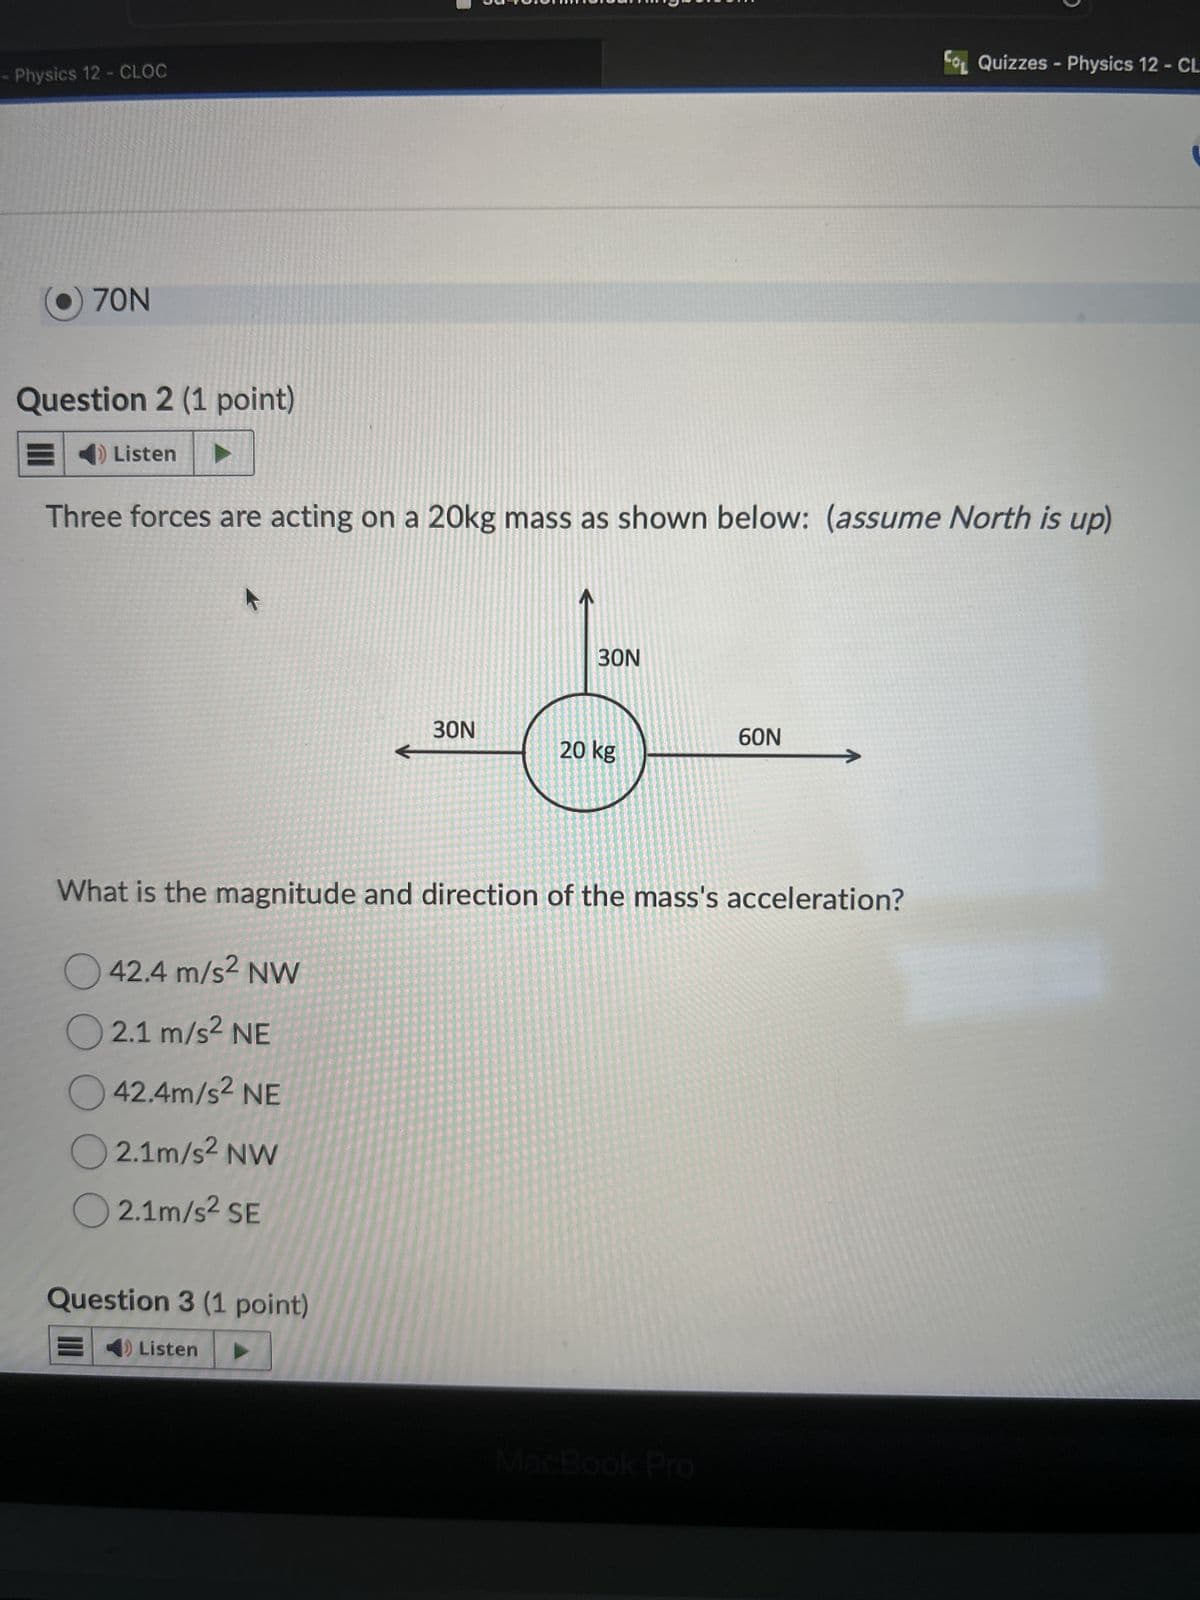 Physics 12 - CLOC
Co Quizzes - Physics 12 - CL
70N
Question 2 (1 point)
Listen
Three forces are acting on a 20kg mass as shown below: (assume North is up)
30N
30N
60N
20 kg
What is the magnitude and direction of the mass's acceleration?
42.4 m/s² NW
2.1 m/s² NE
42.4m/s² NE
2.1m/s² NW
2.1m/s² SE
Question 3 (1 point)
Listen
MacBook Pro
་